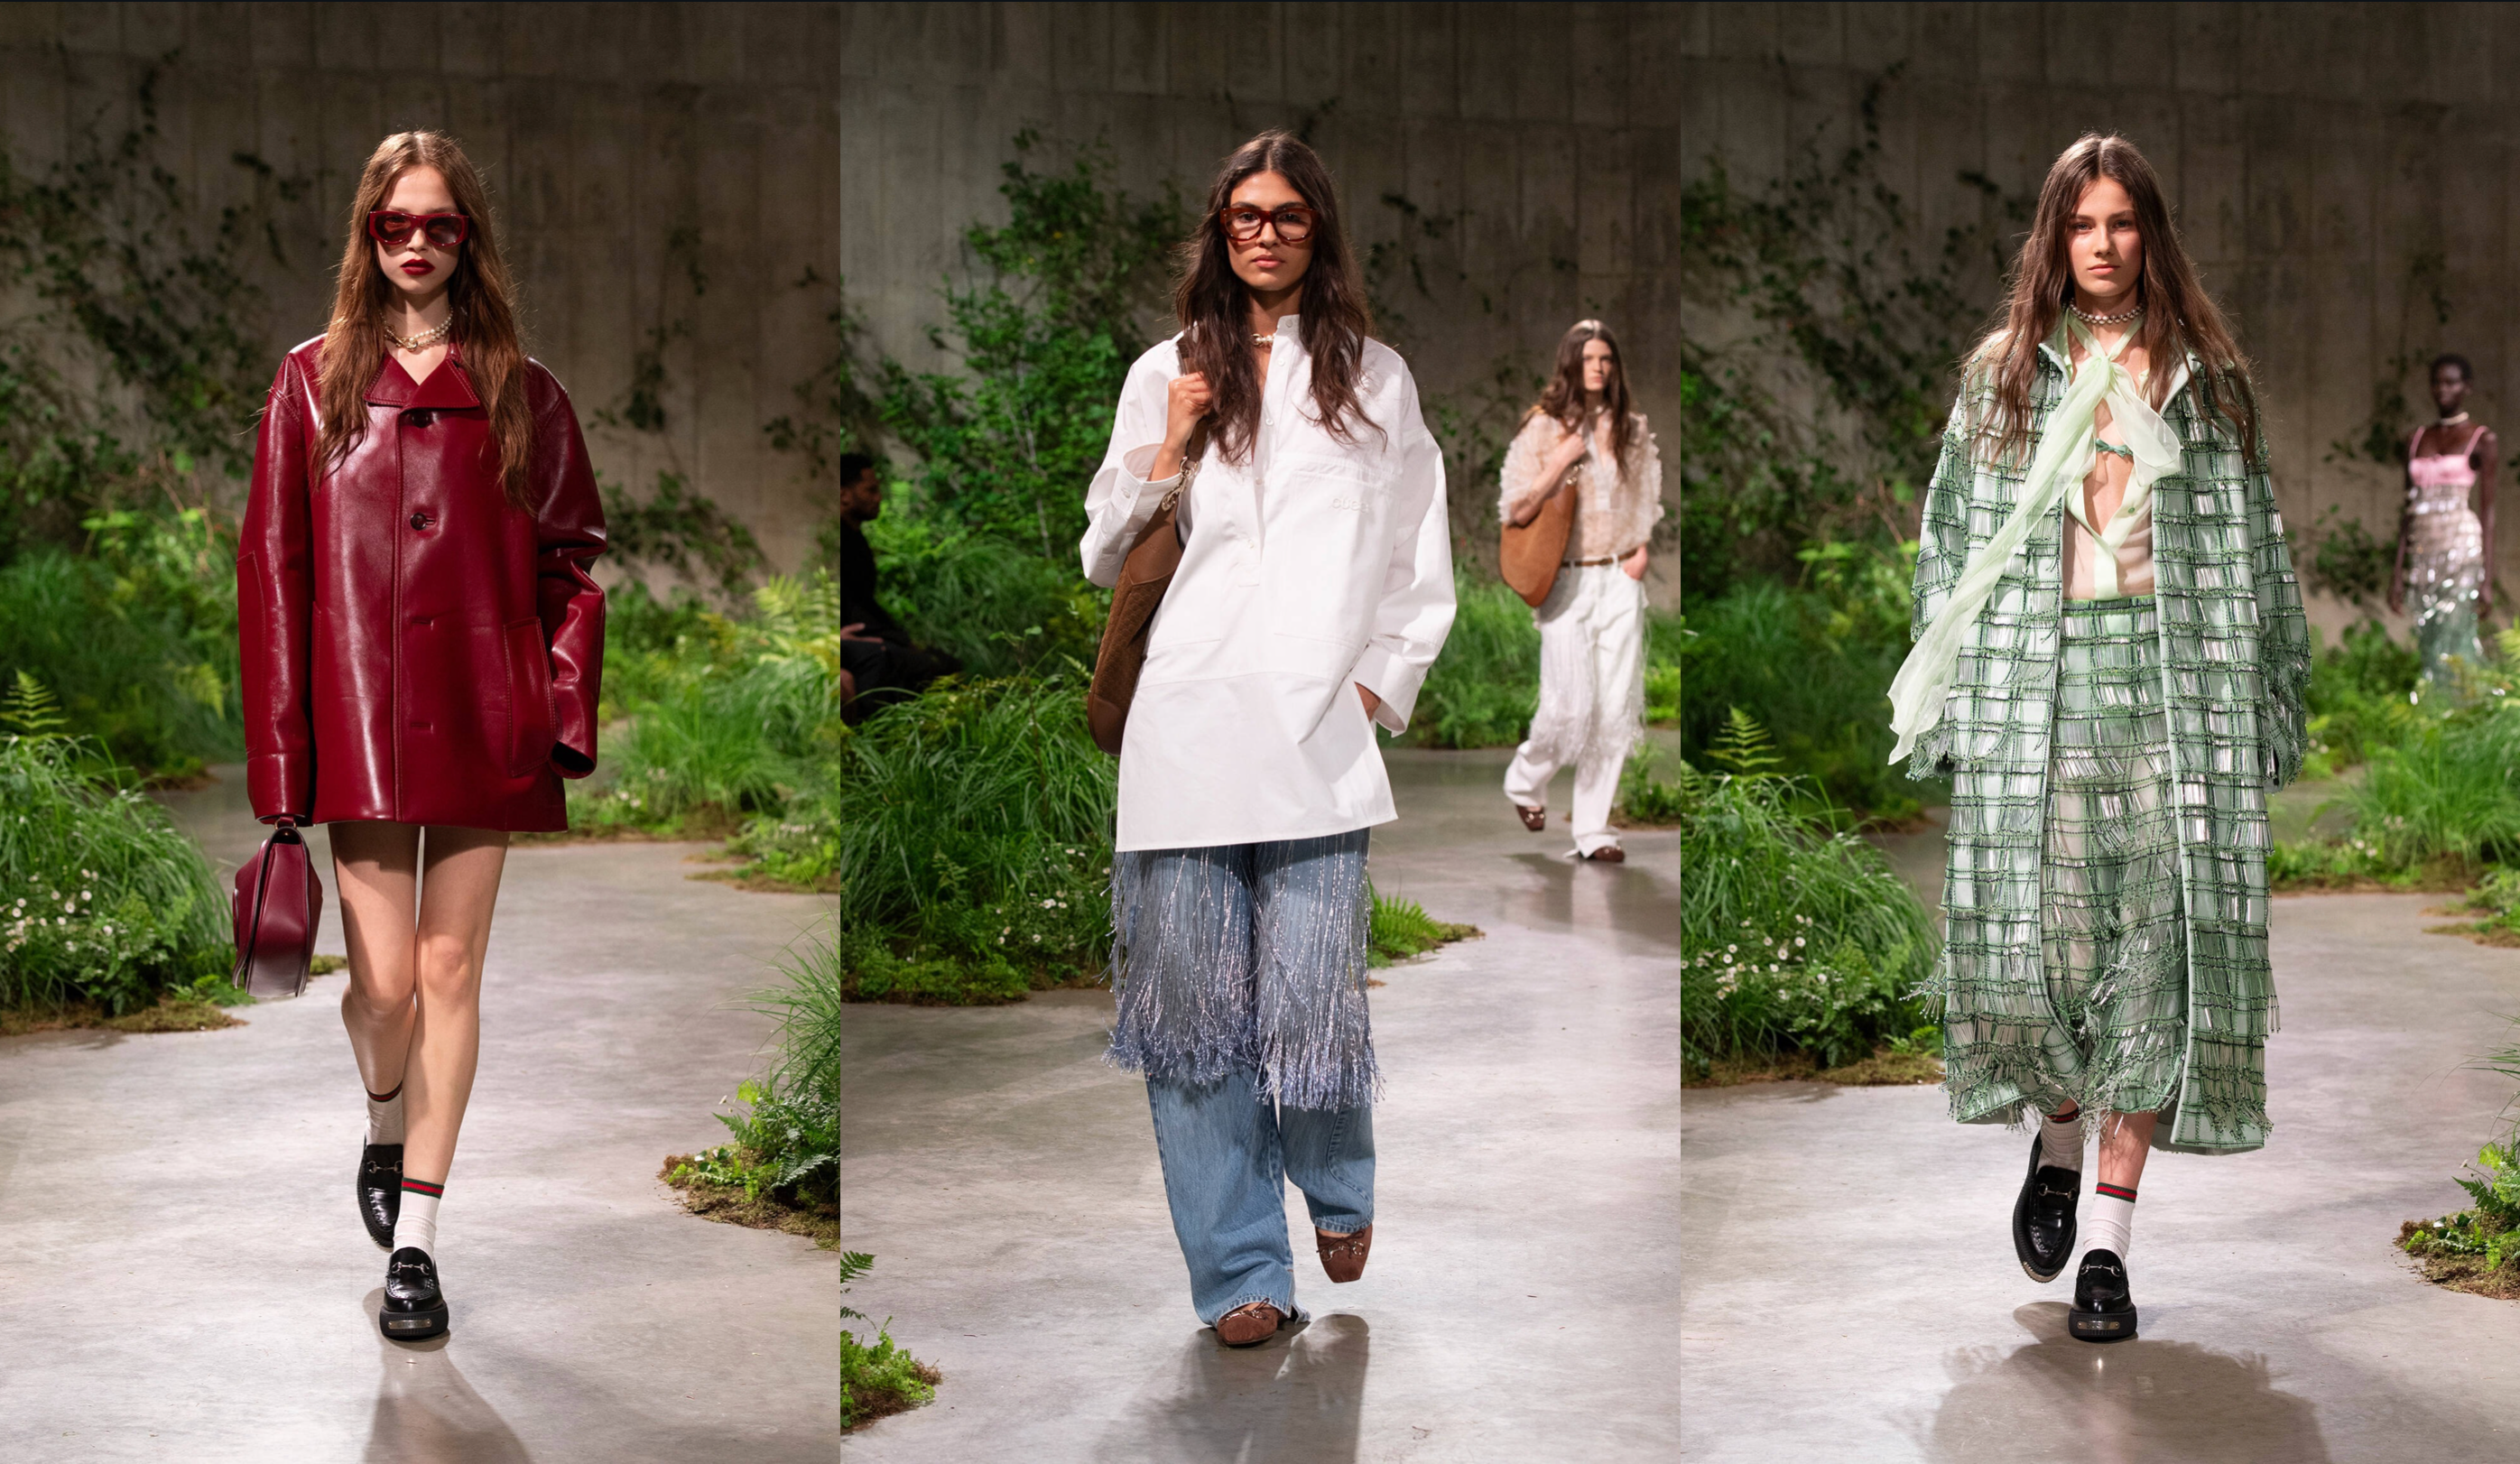 Looks from Sabato de Sarno's Gucci Cruise 2025 show in London. Images: Gucci